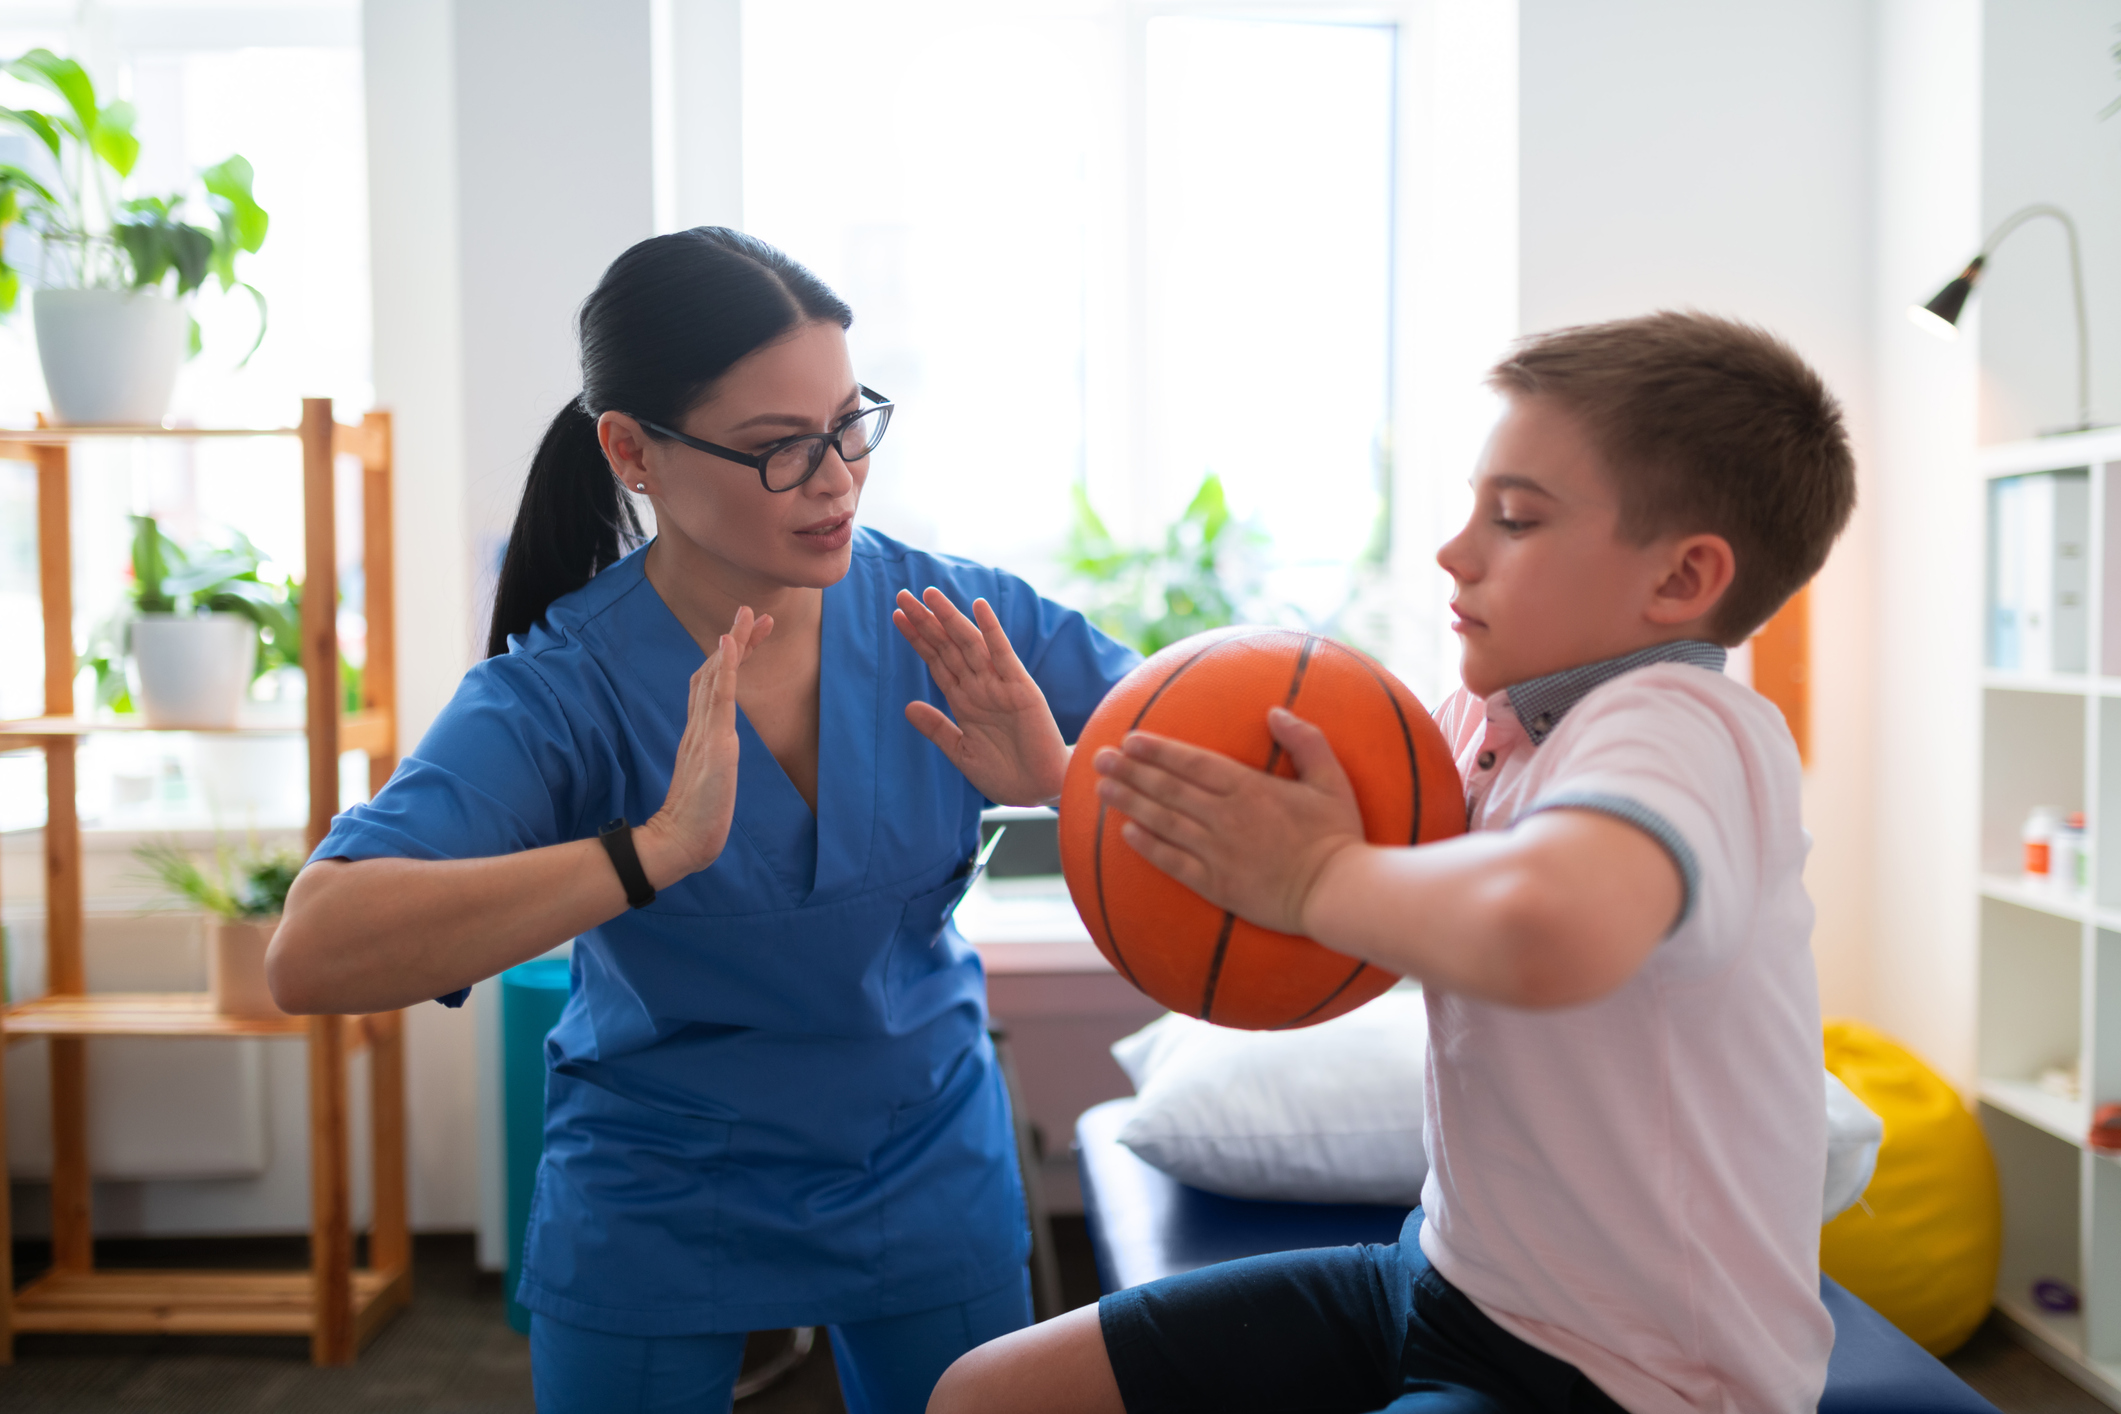 Patient throwing basketball with a clinician